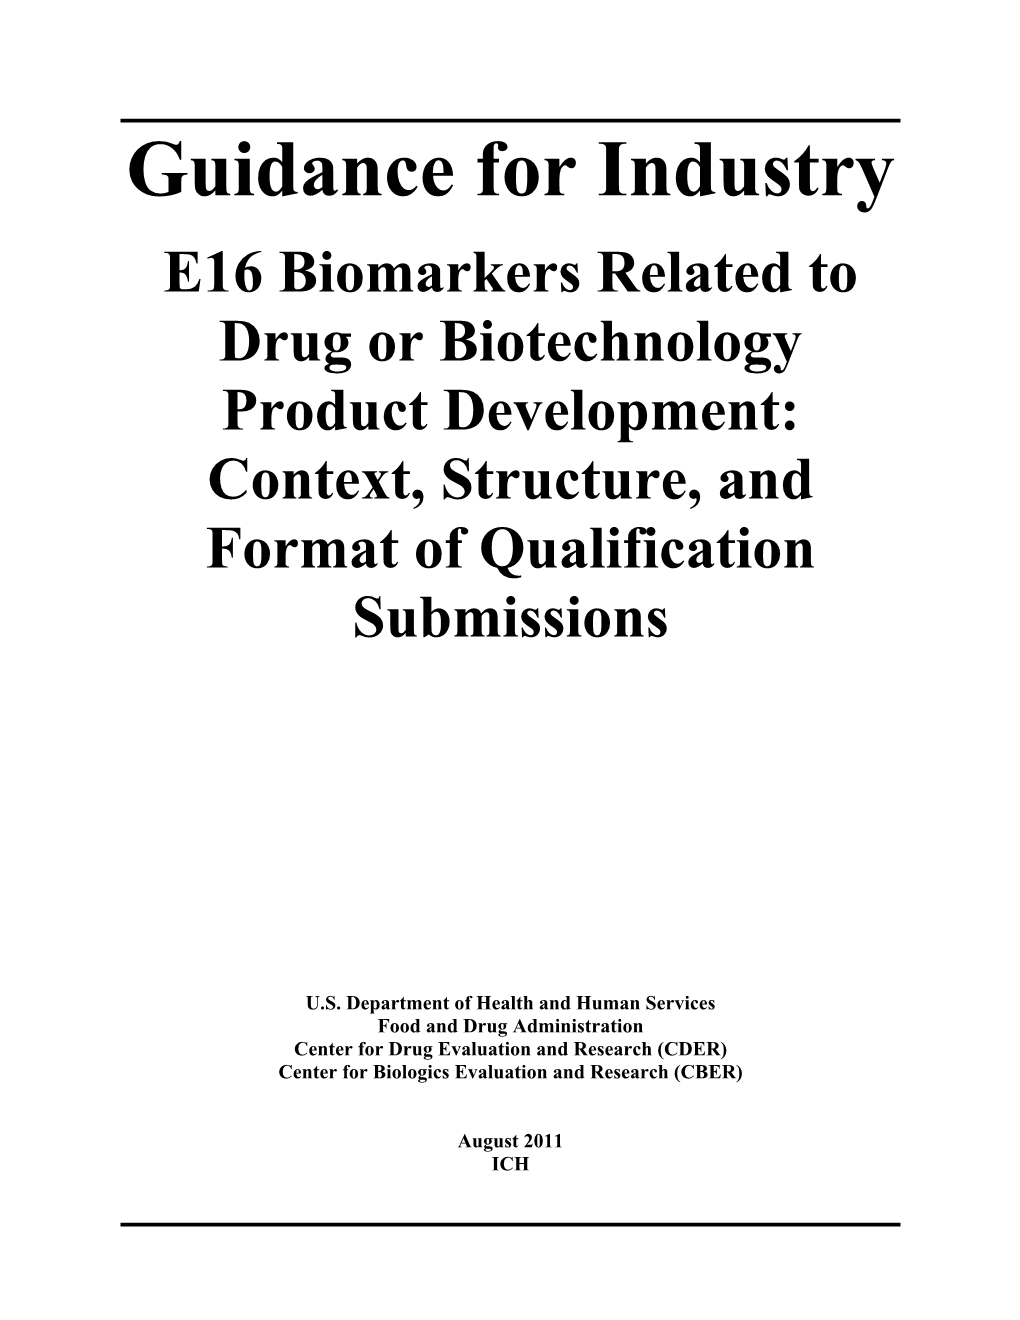 ICH E16 Biomarkers Related to Drug Or Biotechnology Product